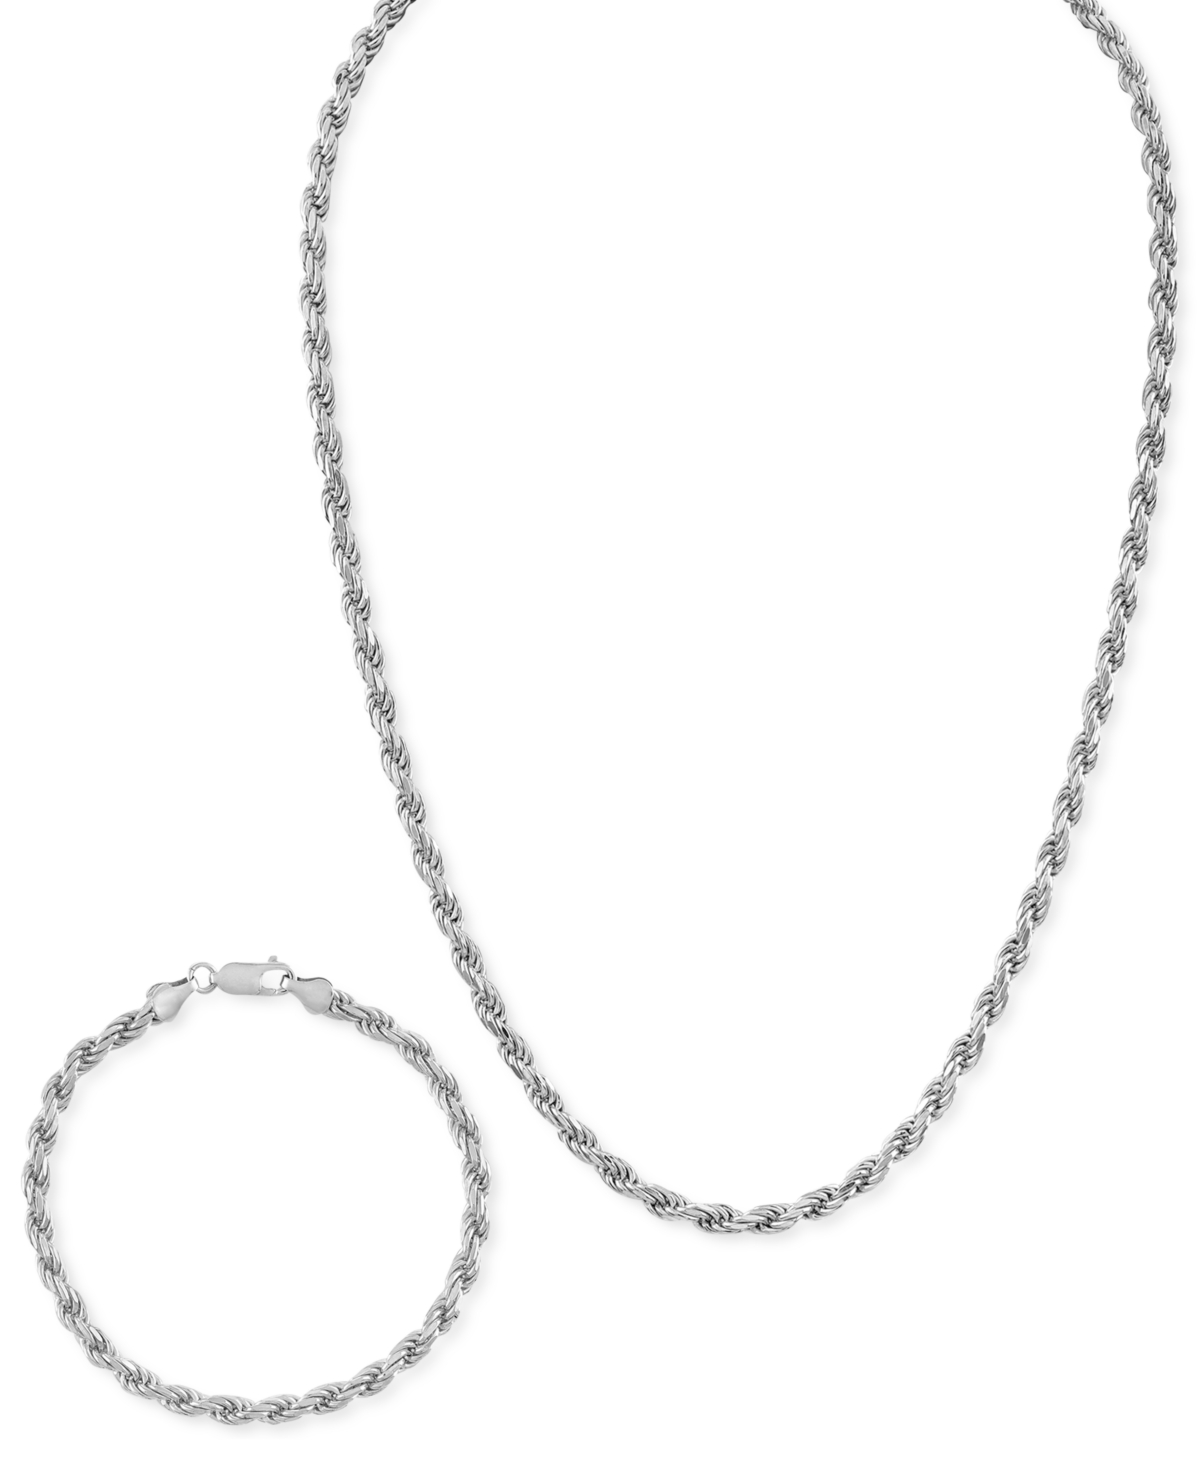 2-Pc. Set 22" Rope Link Chain Necklace & Matching Bracelet, Created for Macy's - Silver